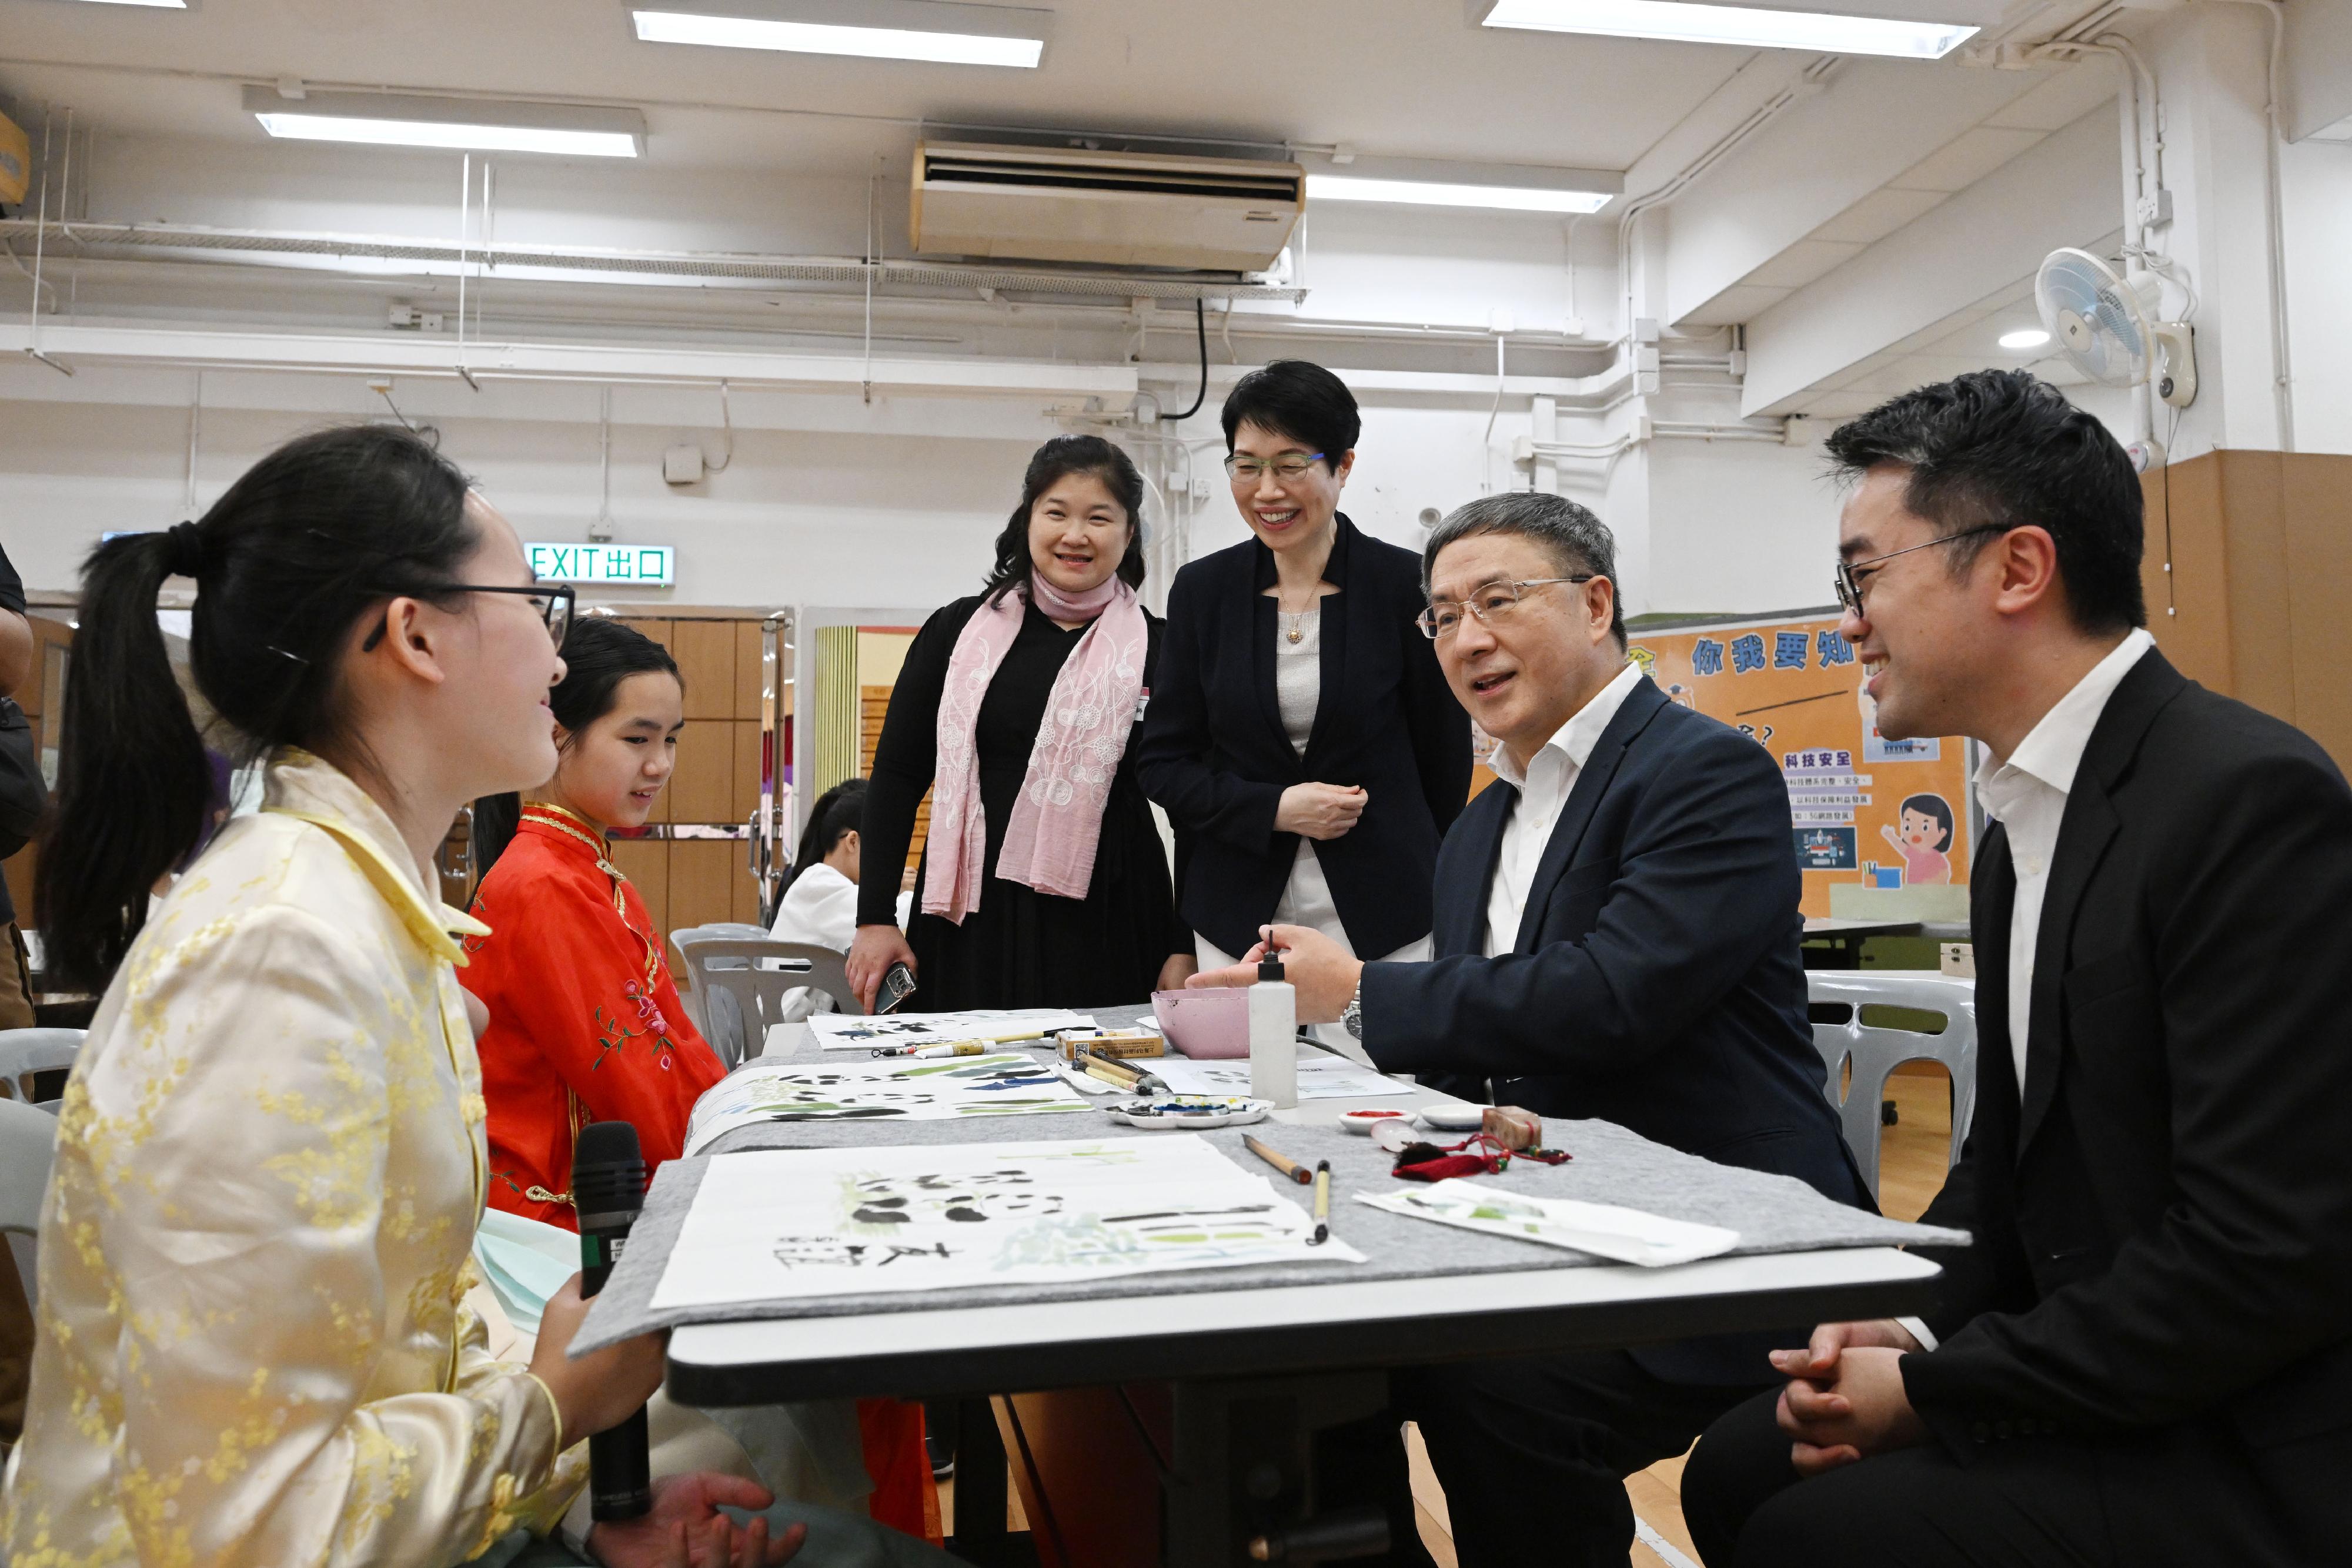 The Deputy Chief Secretary for Administration, Mr Cheuk Wing-hing (second right), learns more about students' achievements at a workshop on traditional Chinese painting at Shatin Government Primary School today (April 13). Next to Mr Cheuk is the Acting Secretary for Education, Mr Sze Chun-fai (first right).